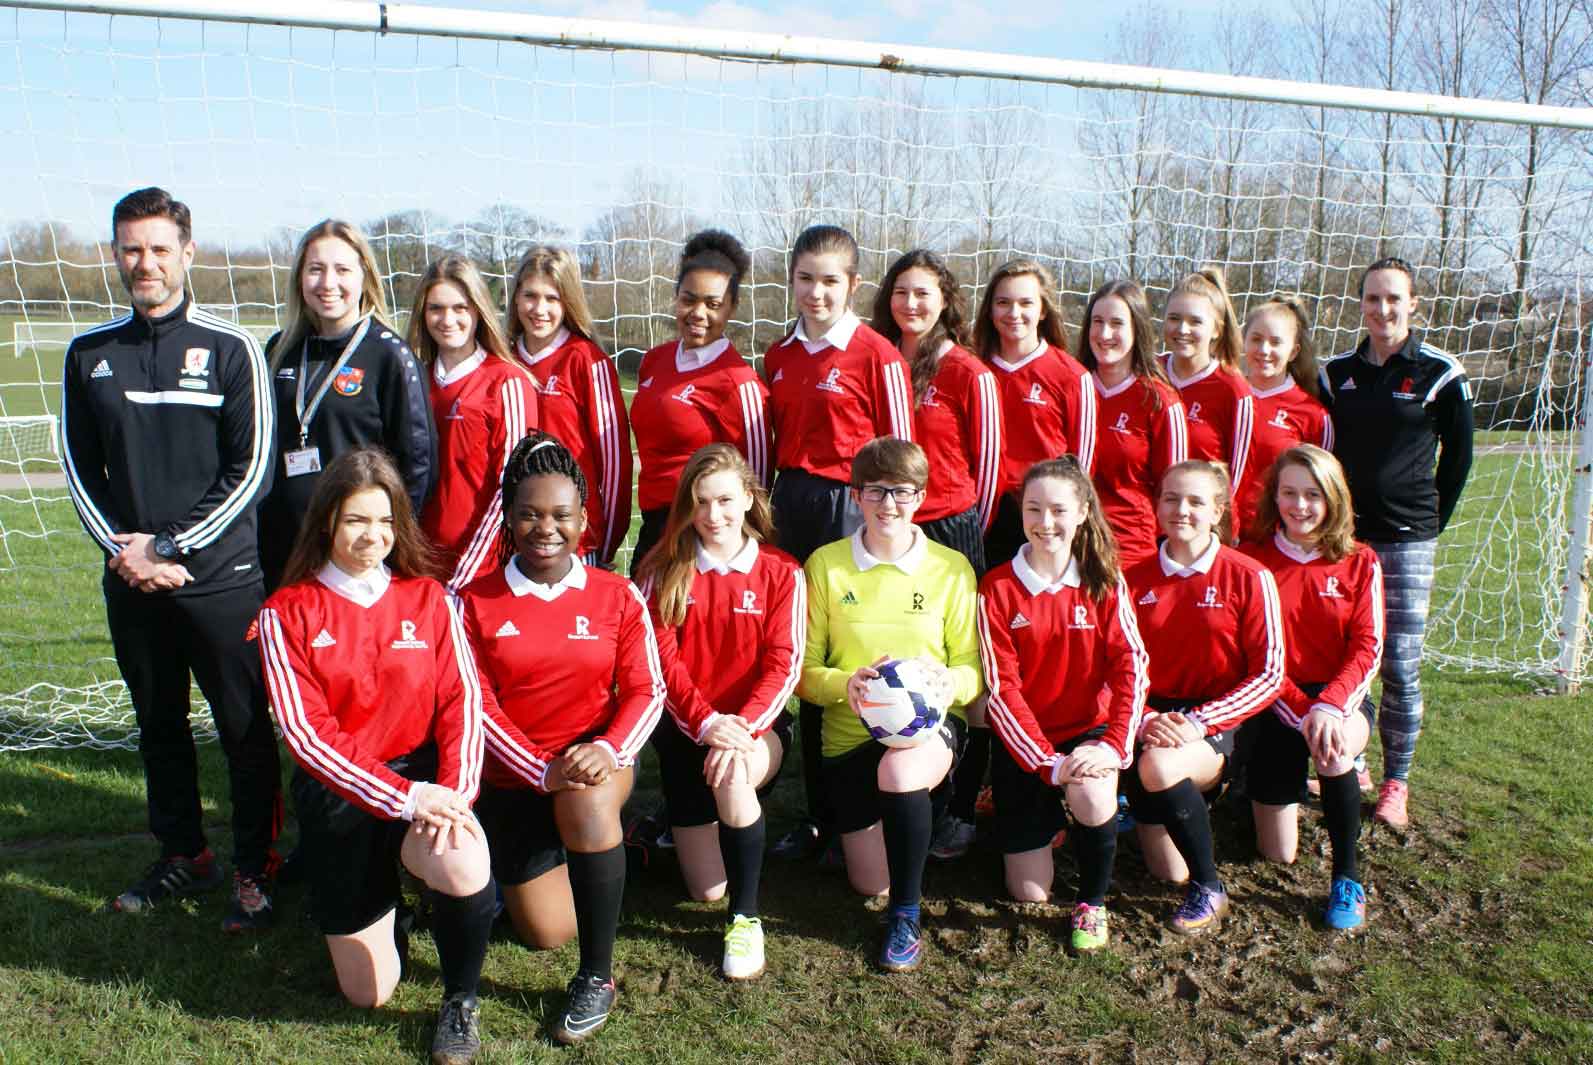 The U14 team from Rossett School will compete in the National Cup Final, after the most successful year ever for girls’ football at the school